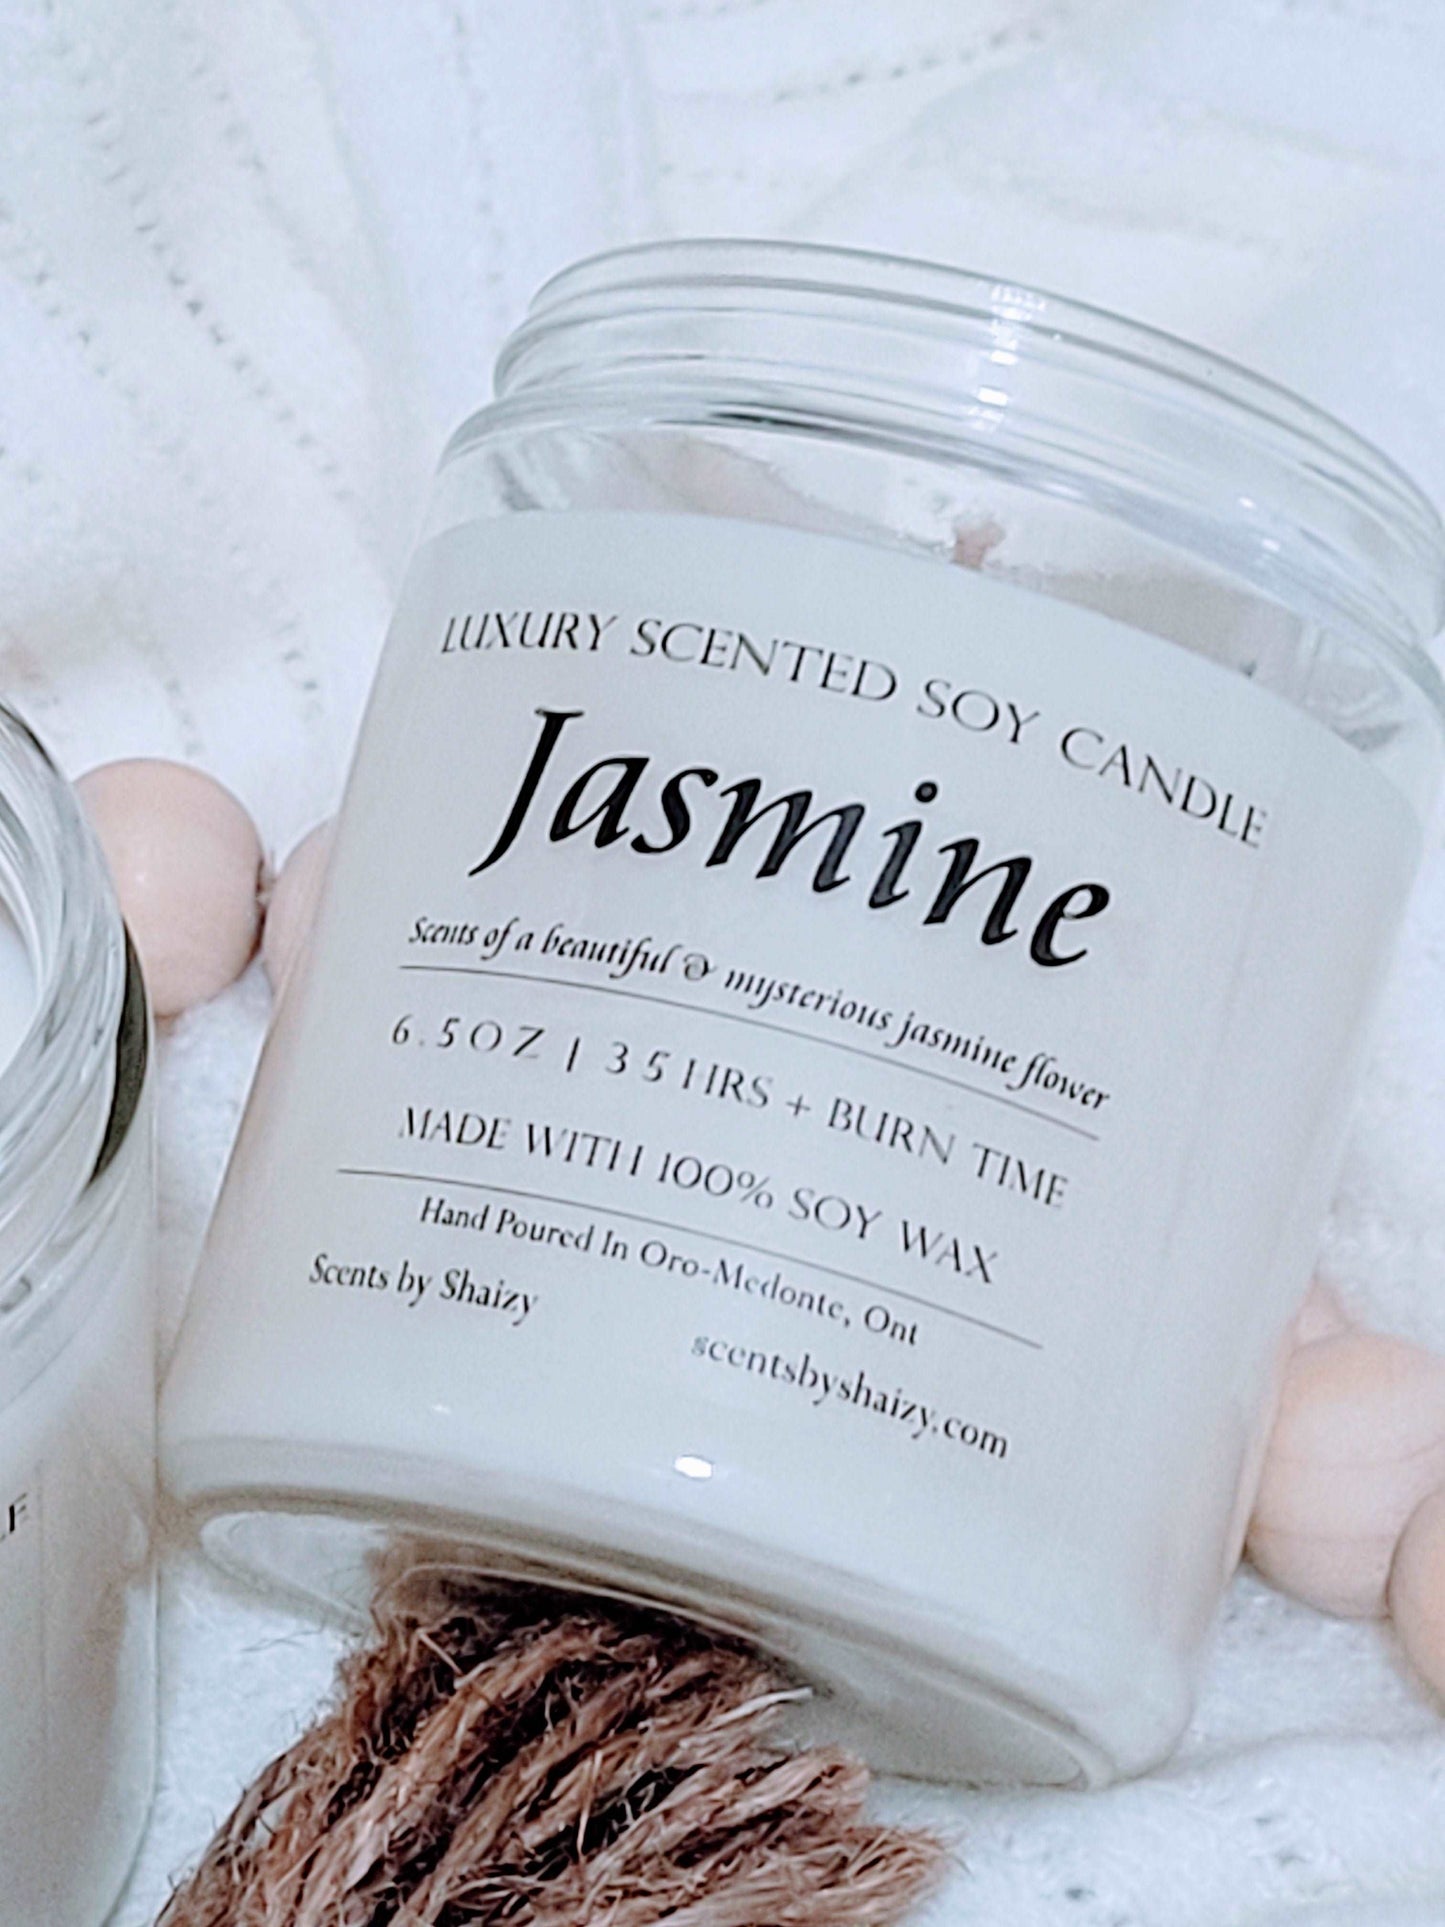 The best soy candles in ontario